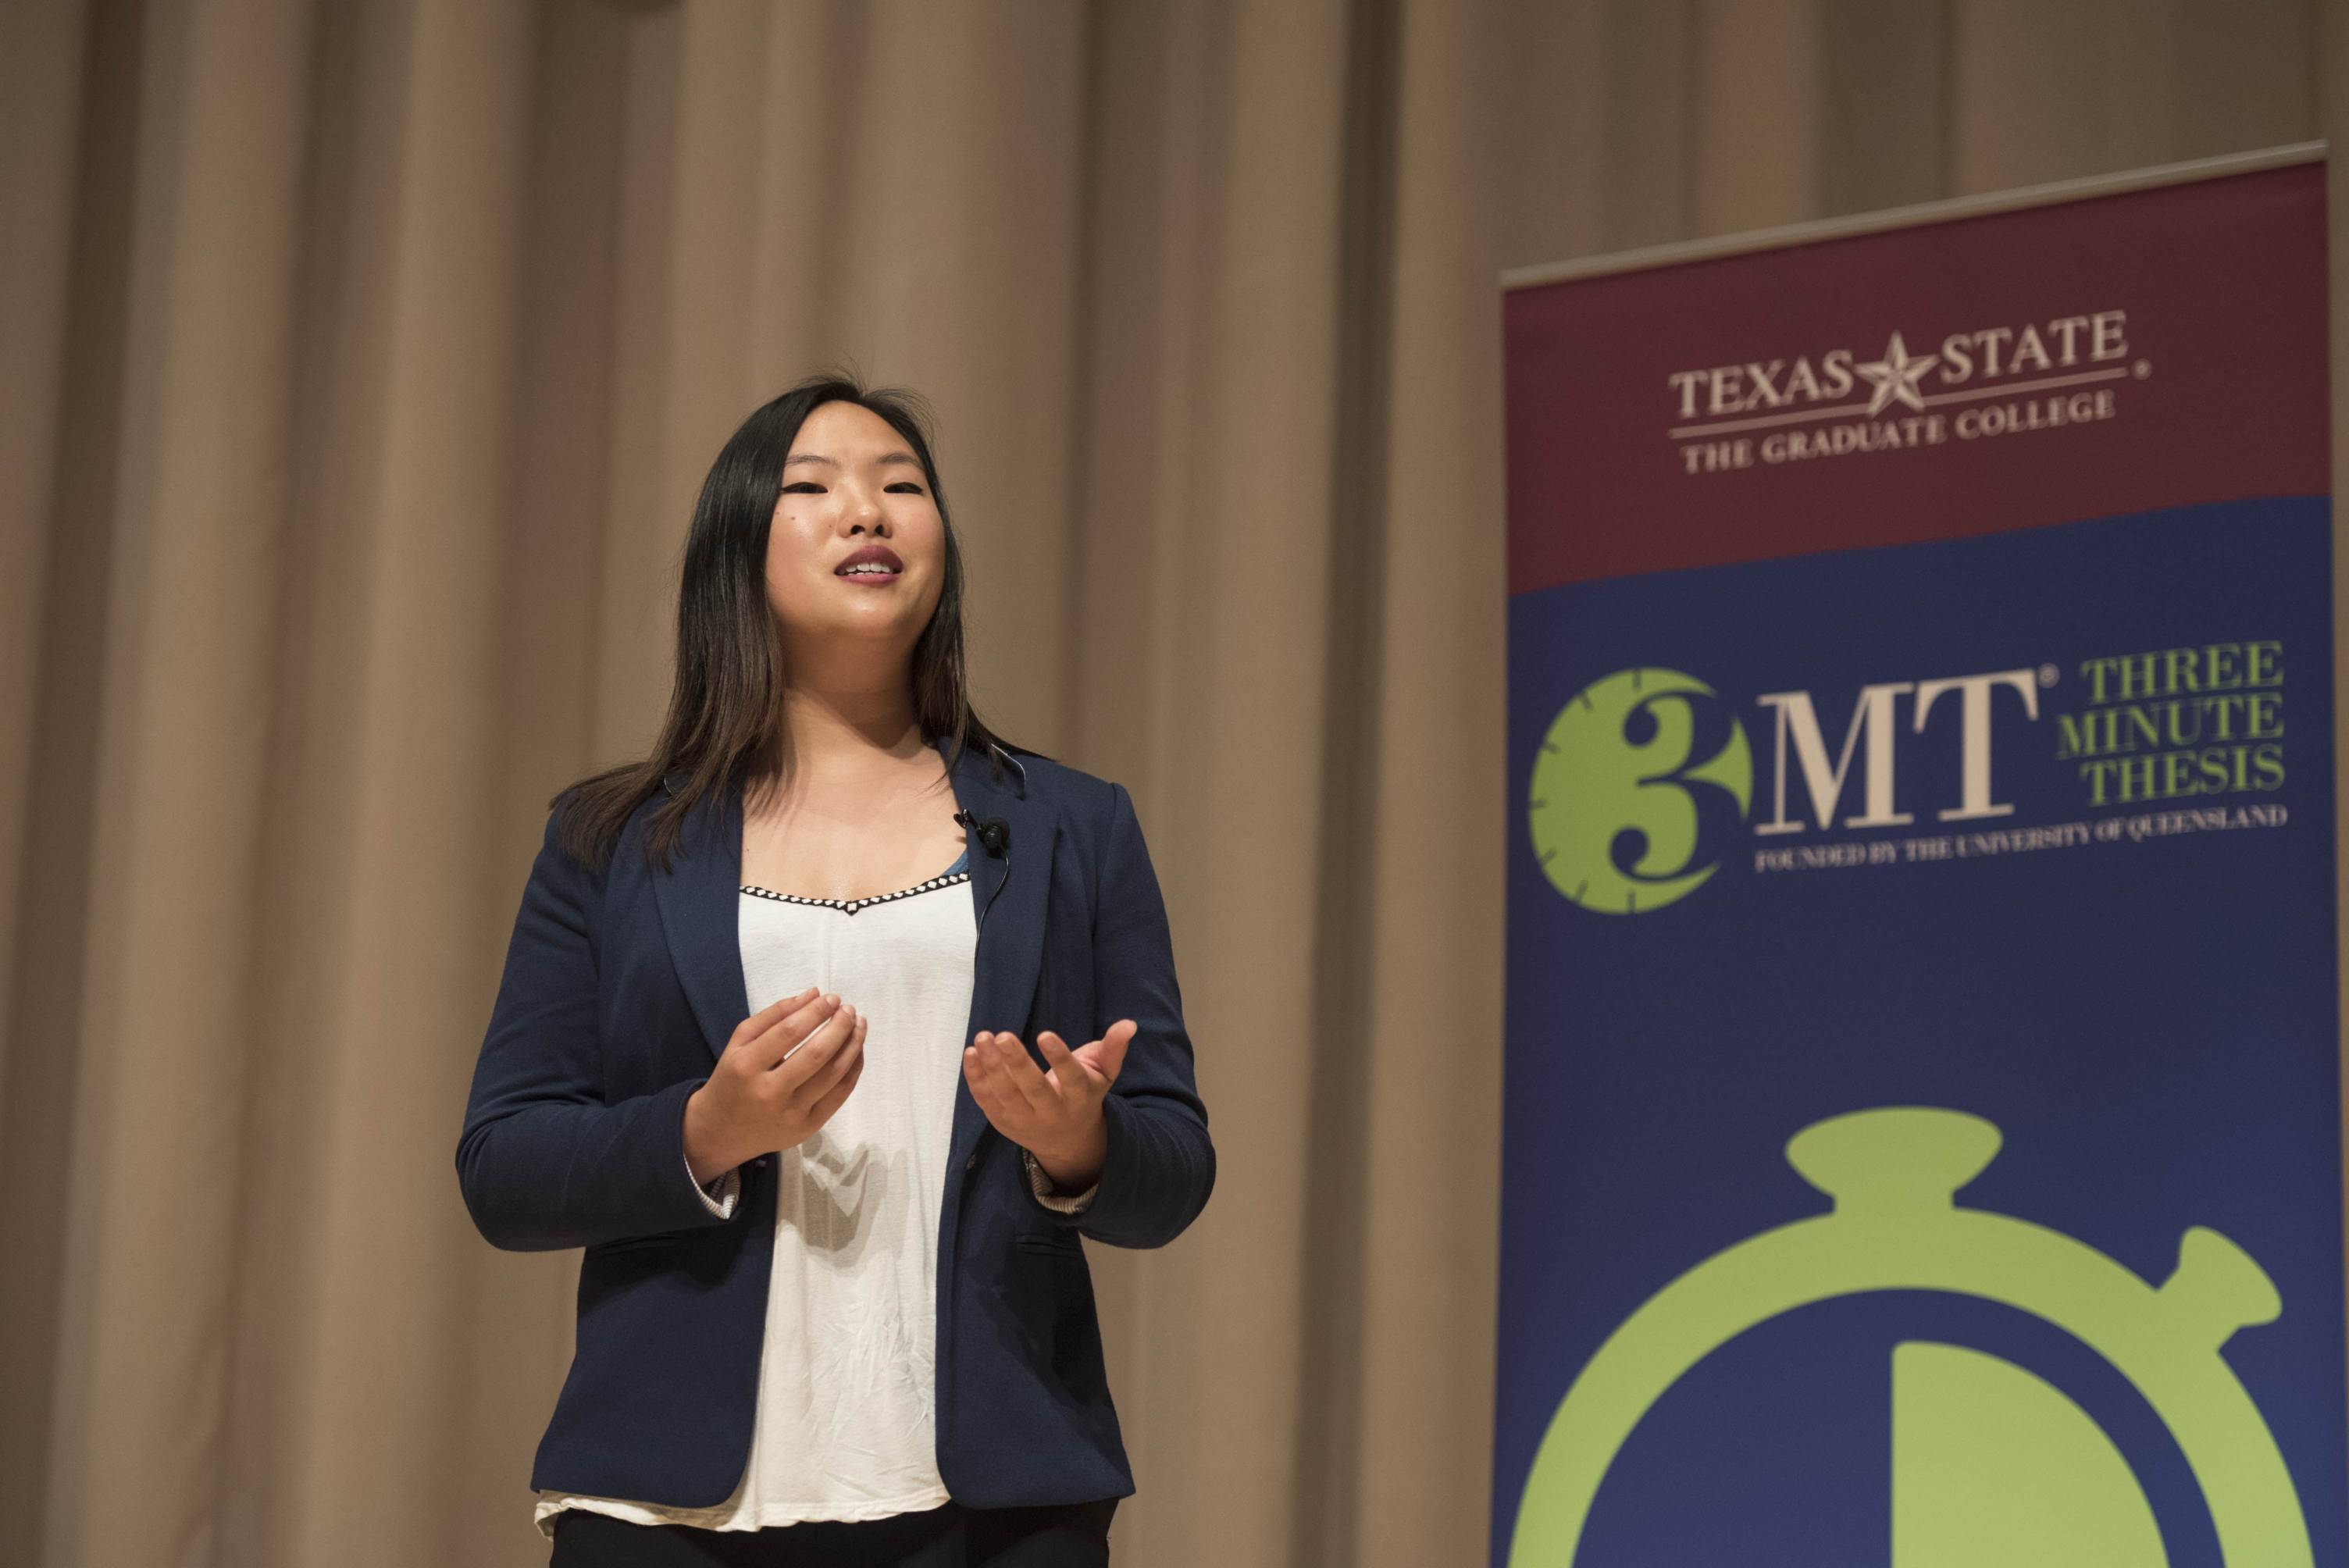 Elaine Y. Chu, master's student in anthropology, presenting "Using Body Mass Estimation to Reunite Families"